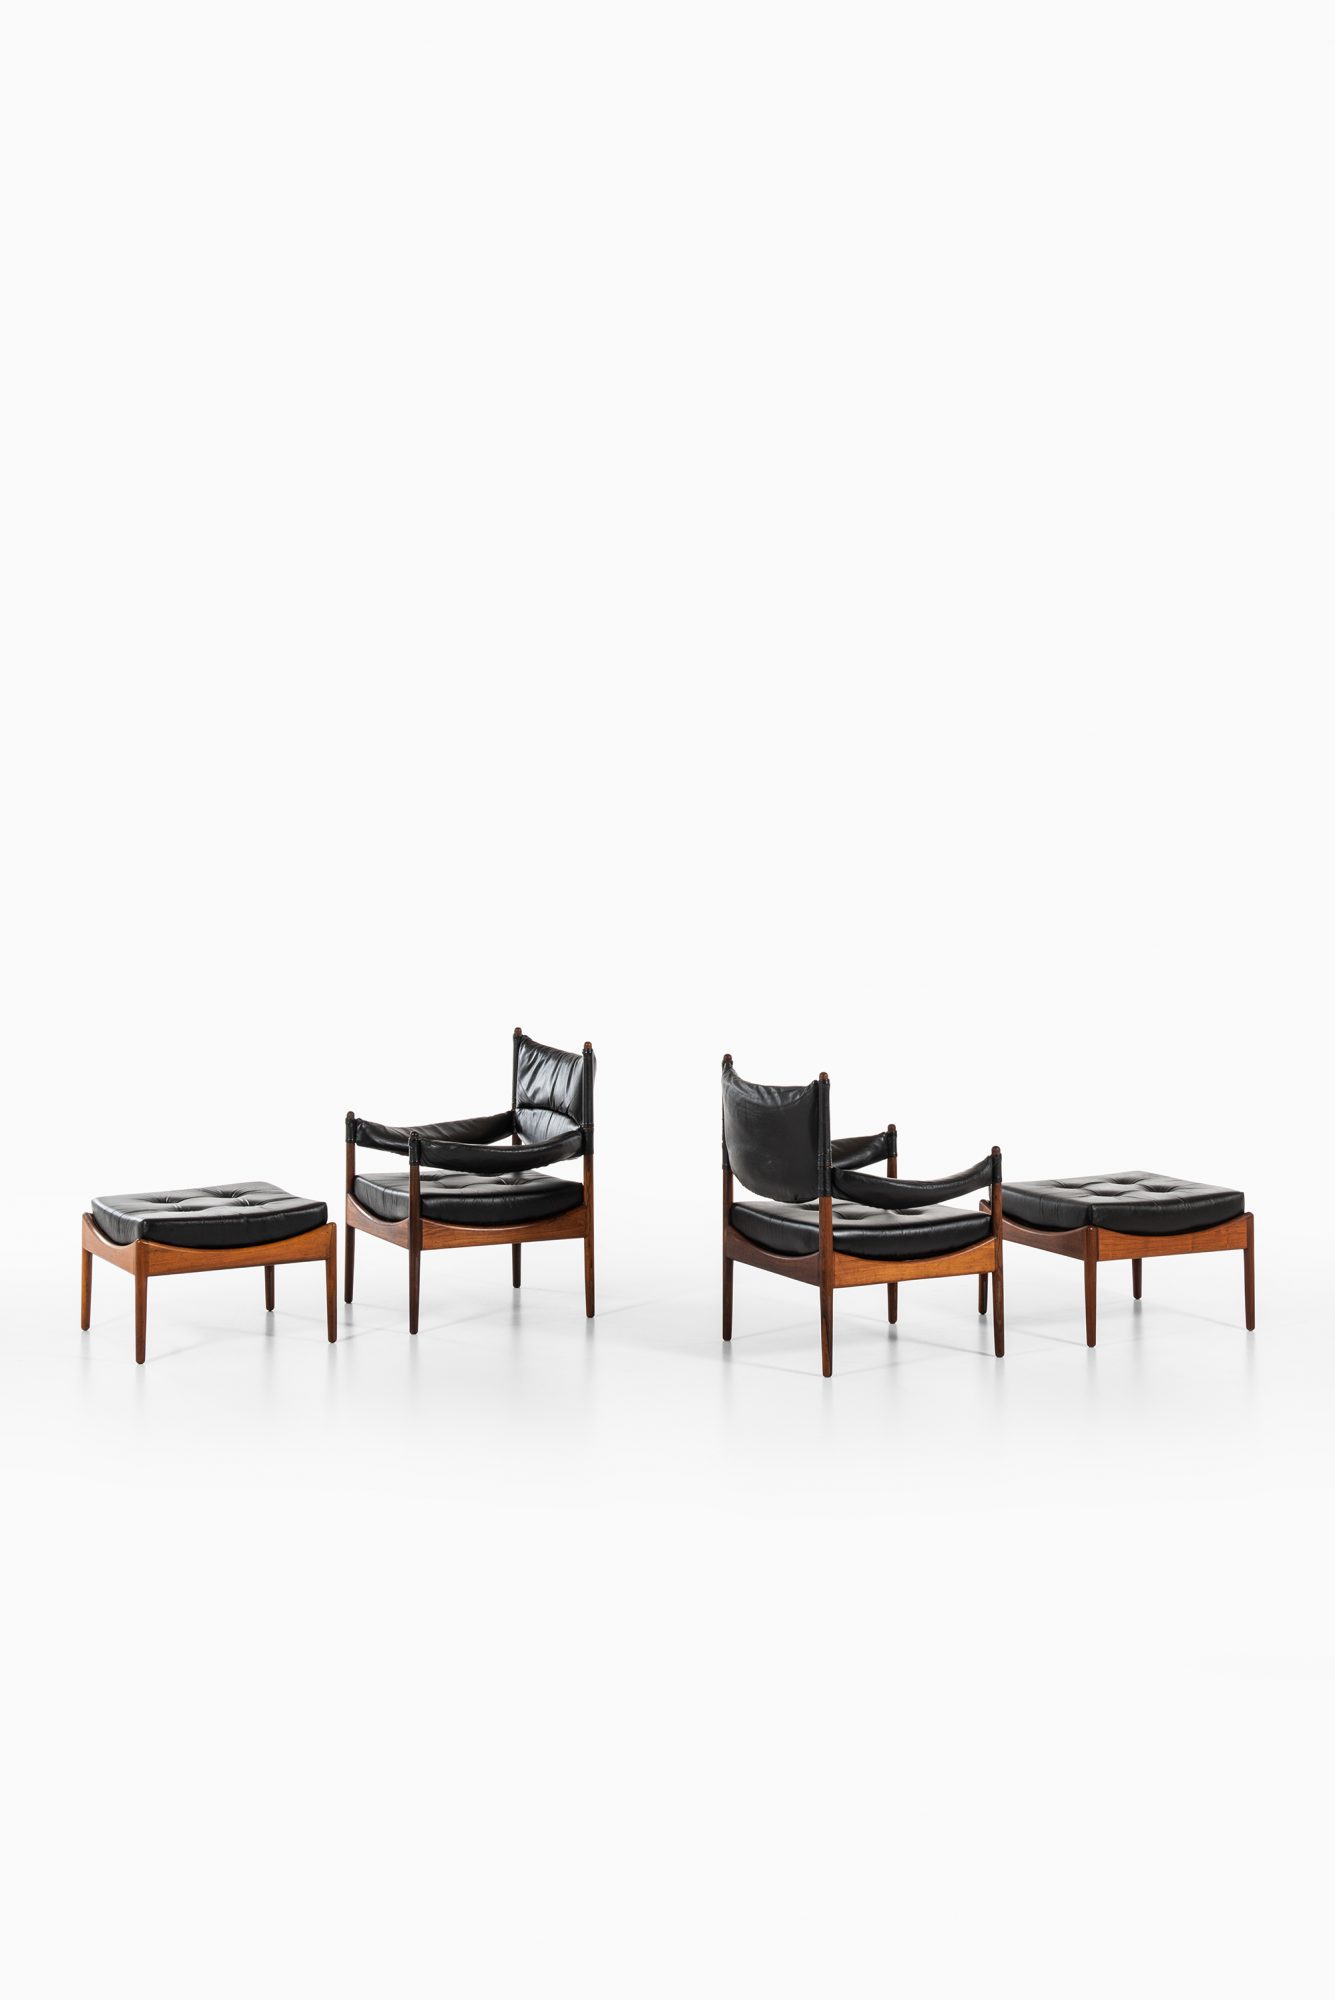 Kristian Solmer Vedel easy chairs model Modus at Studio Schalling